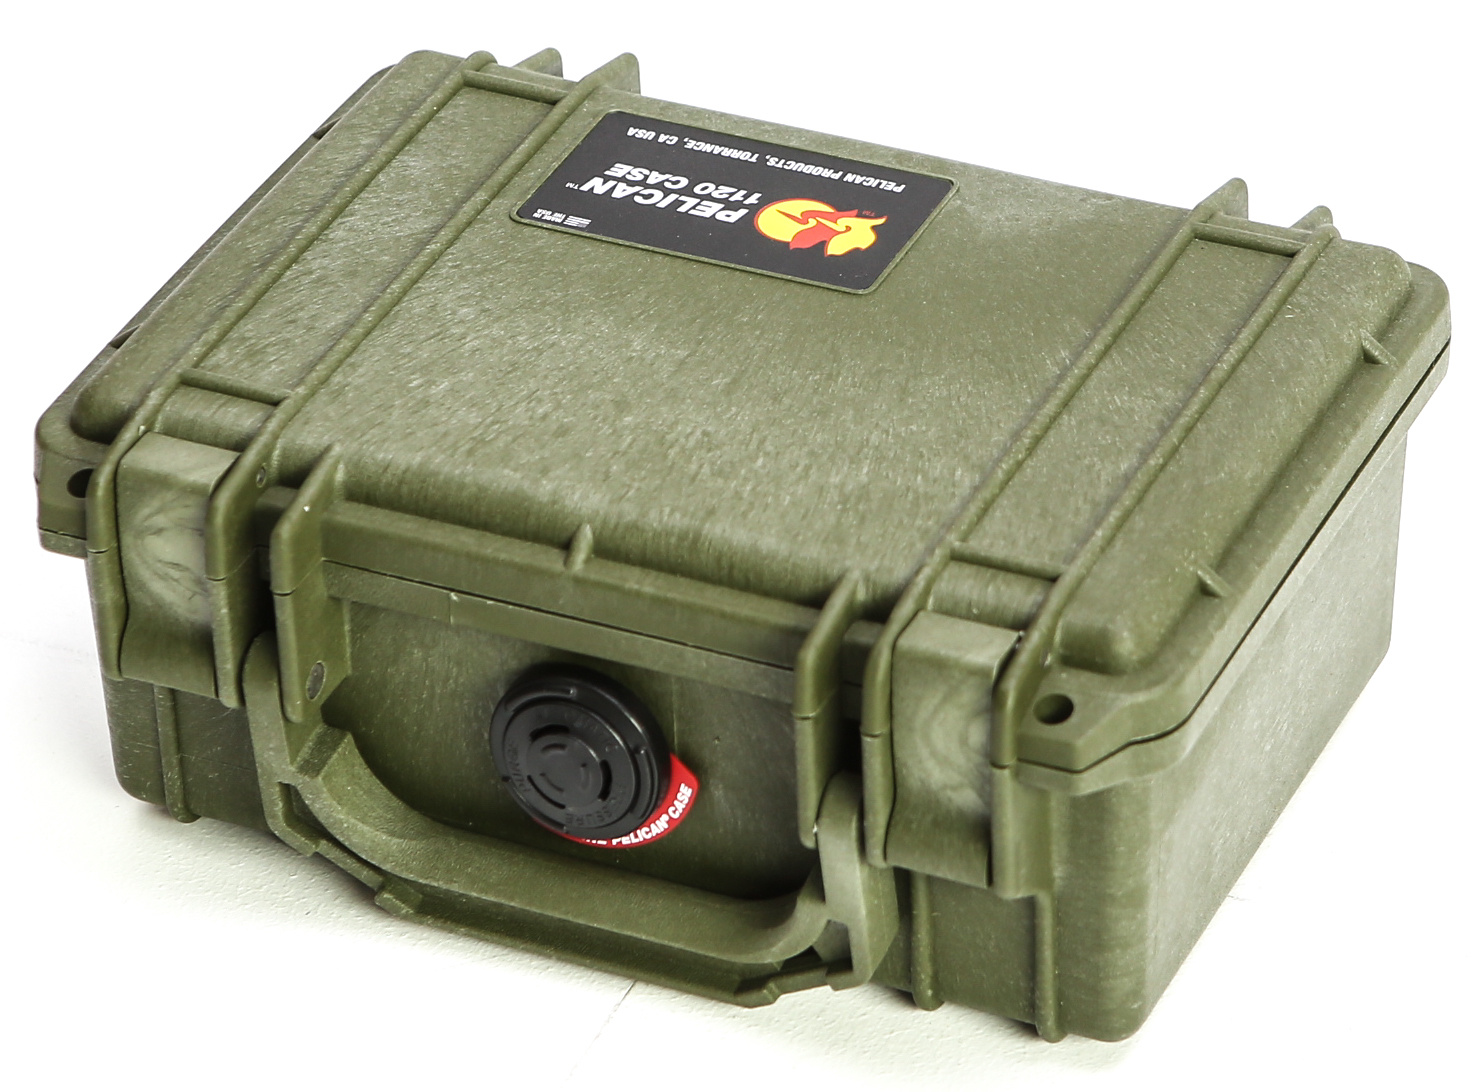 Pelican 1120 Case (Olive Drab Green)